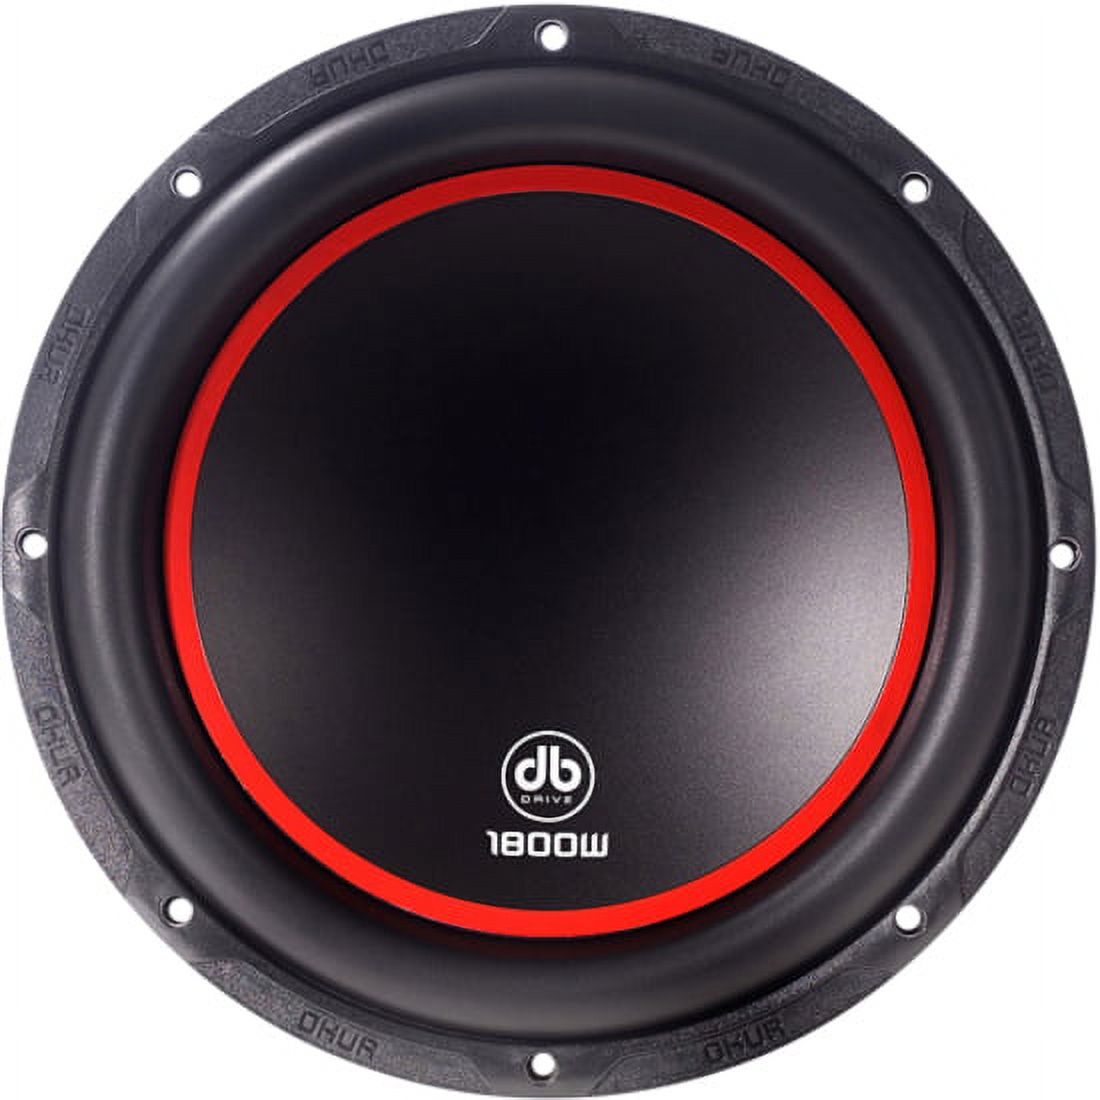 DB Drive K7 12D4 Woofer, 900 W RMS, 1800 W PMPO - image 1 of 1